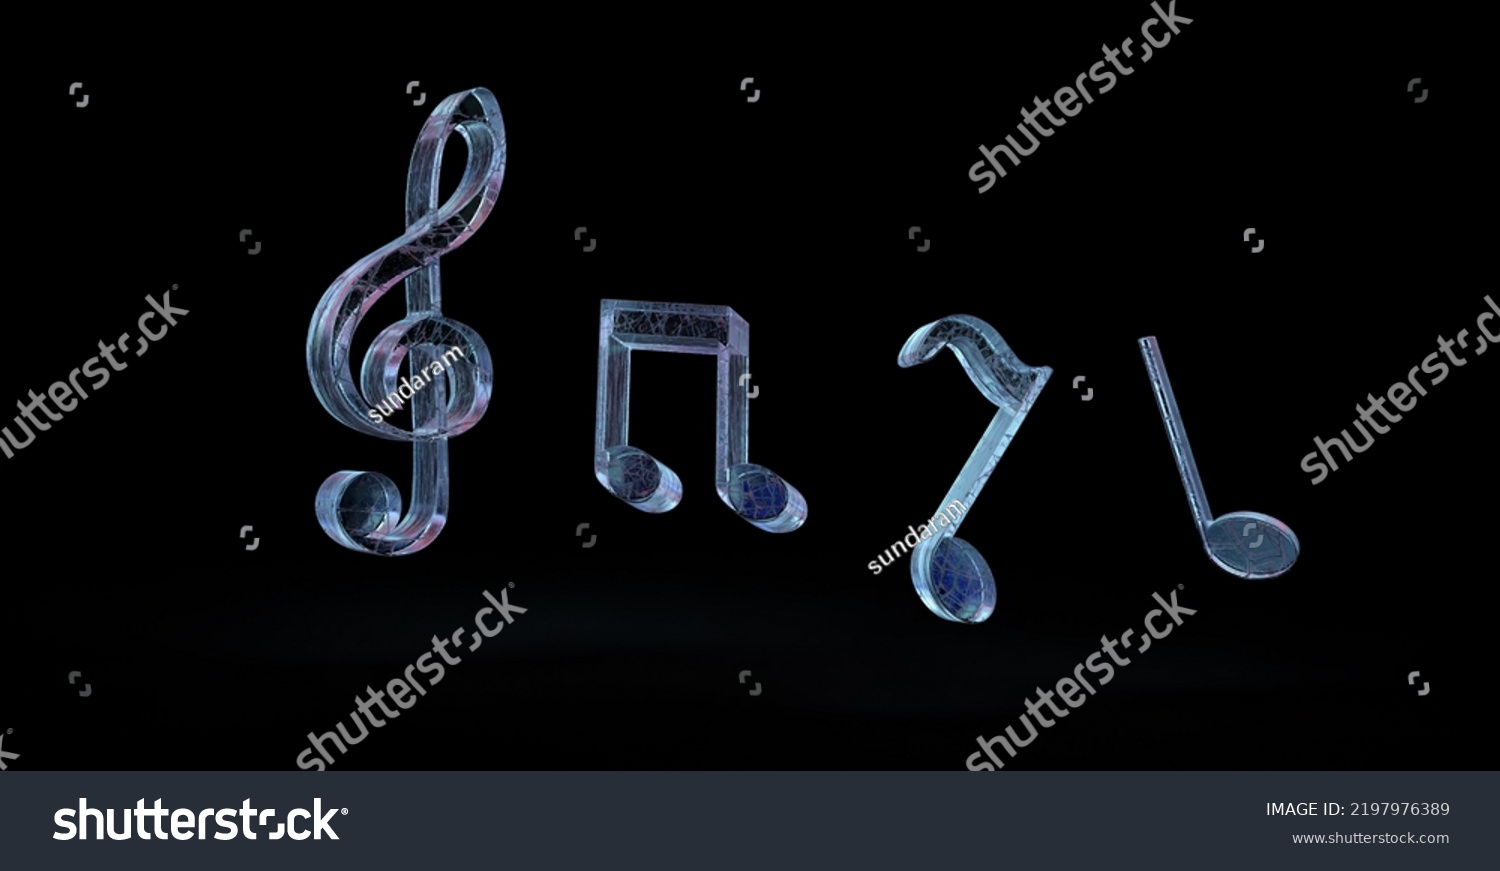 3D Glossy musical notes Music notes 3d model art designs #2197976389